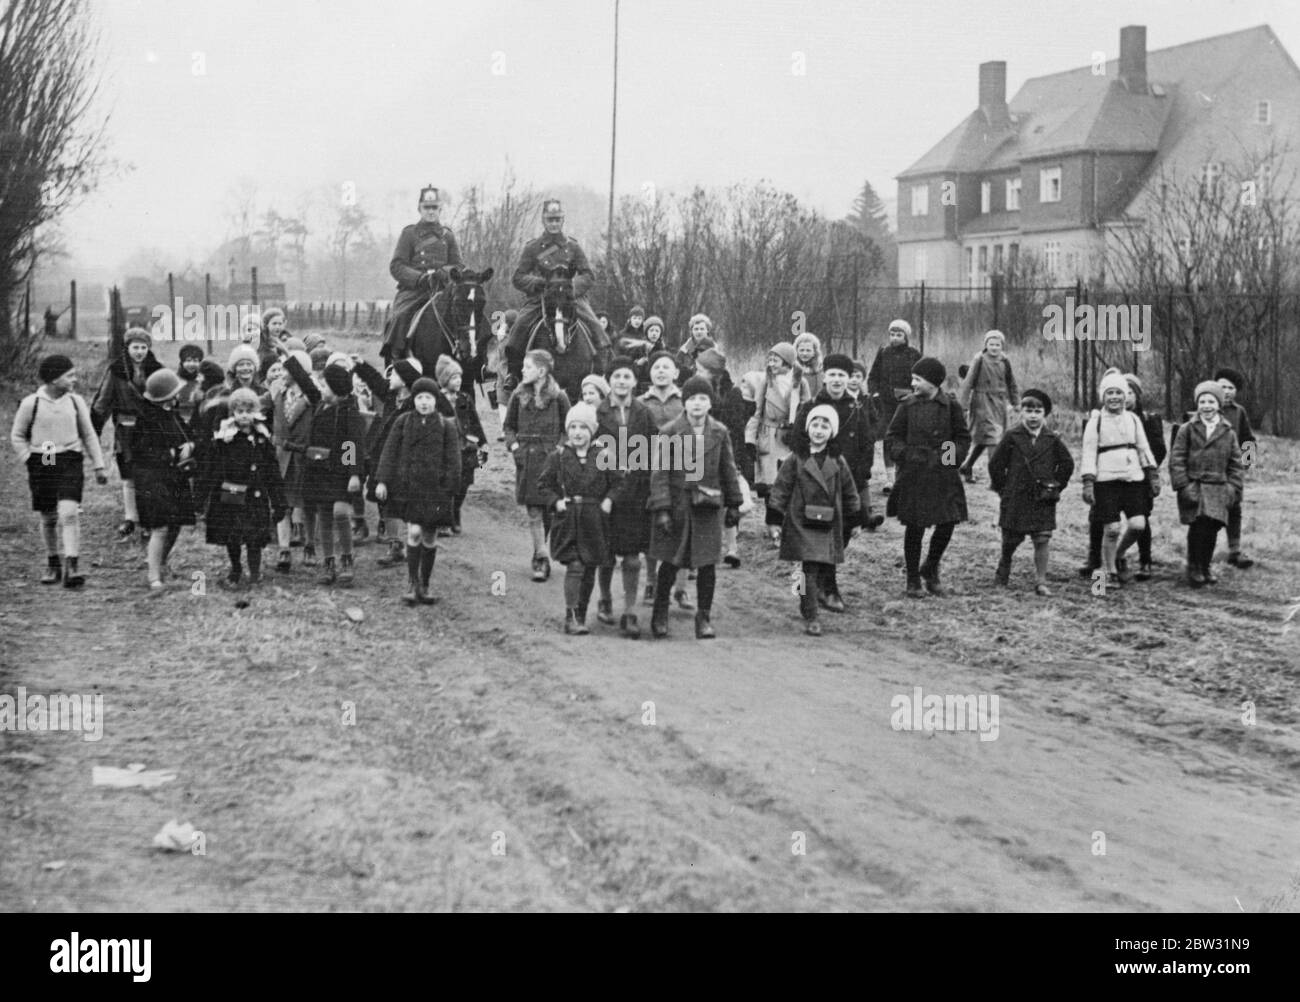 German police escort children to school following kidnapping scare in Berlin suburb . Following the disappearance of a schoolgirl from the Zehlendorf suburb of Berlin , police are escorting the schoolchildren to and from their schools , while a close watch is kept on them while at play in the fields . Police escorting German schoolchildren to school in the Zehlendorf suburb of Berlin . 10 March 1932 Stock Photo